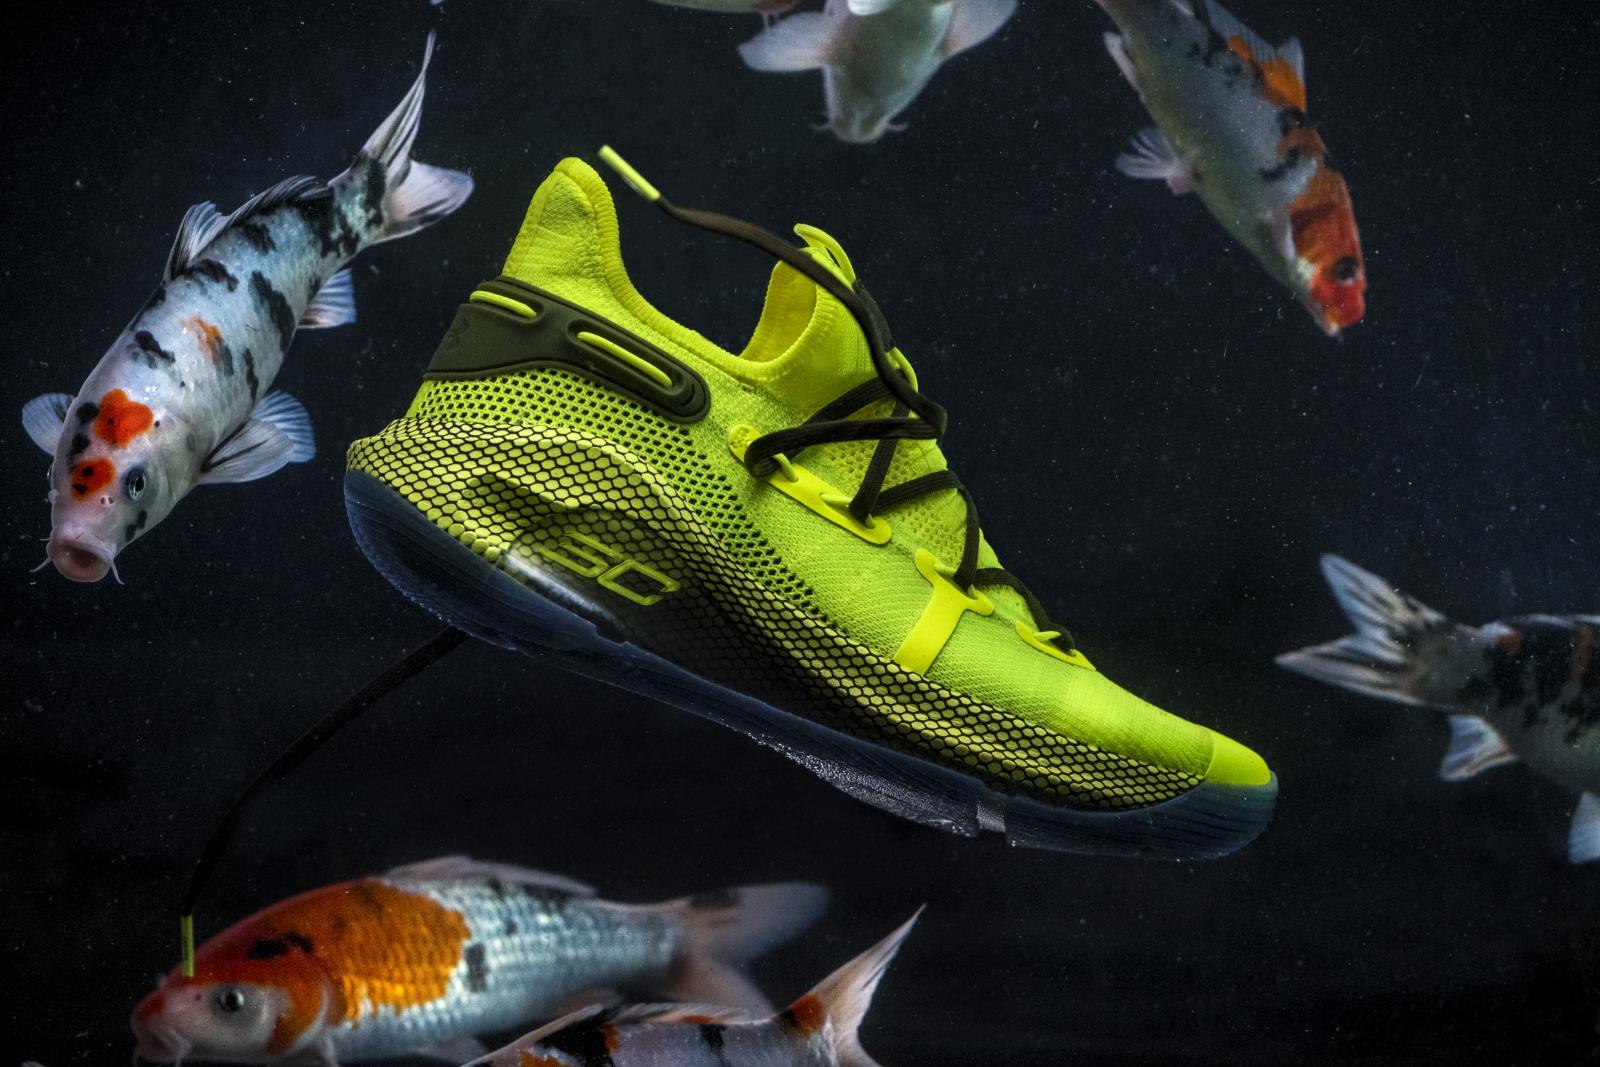 Introducing the Curry 6 Coy Fish Colorway